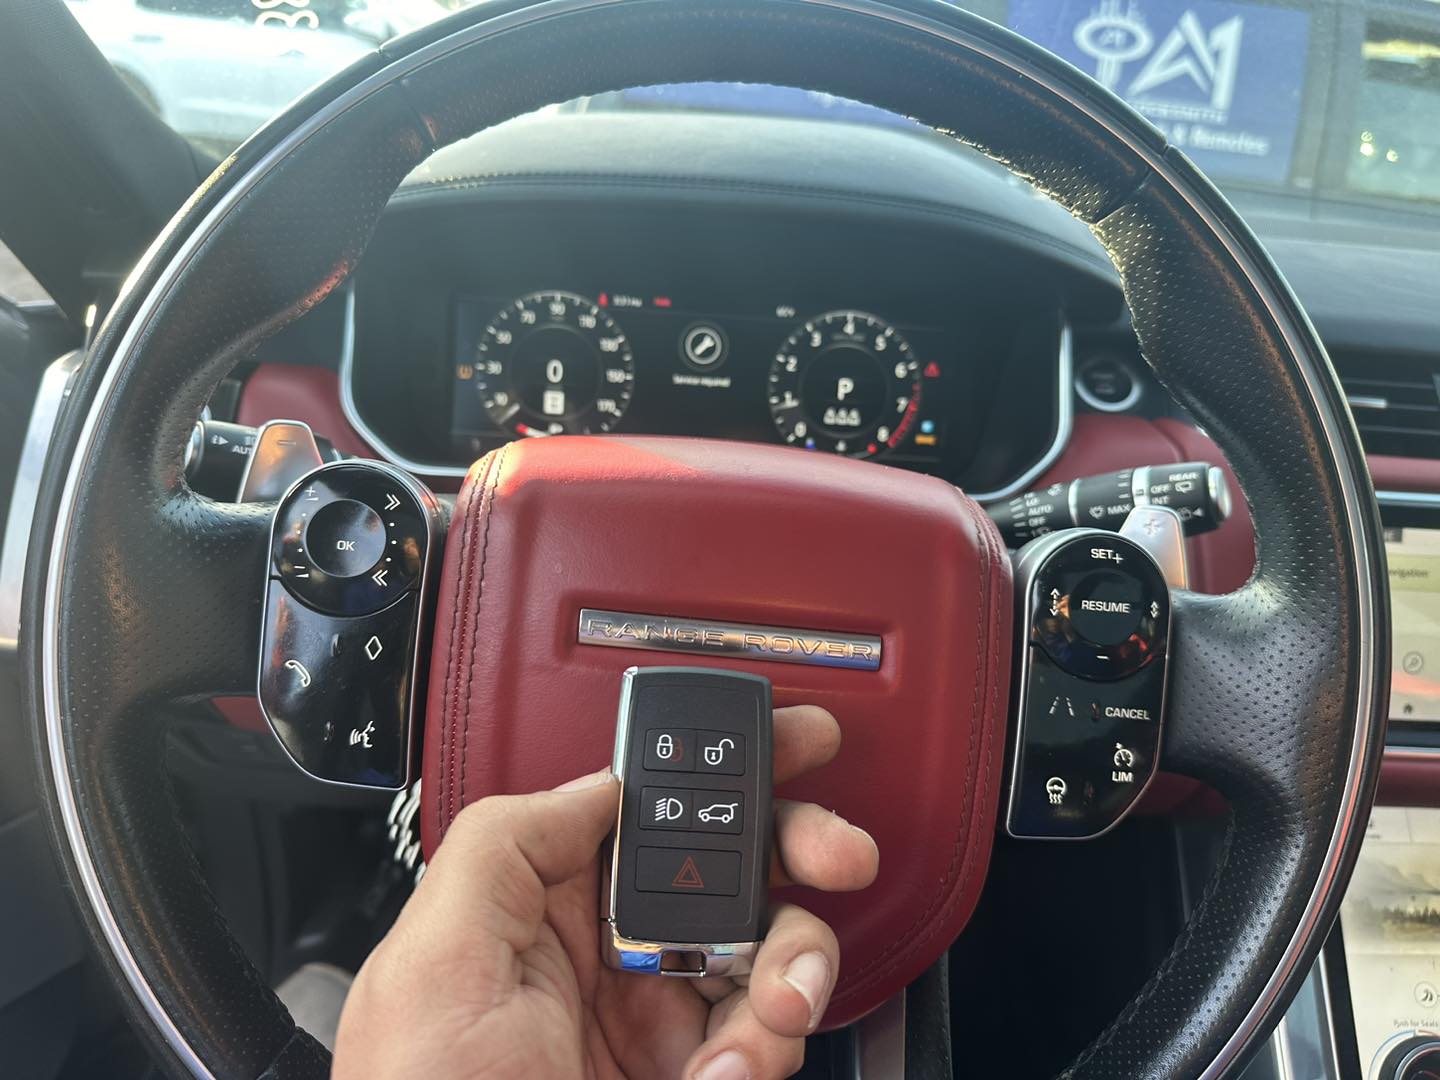 Range Rover Car Key Replacement